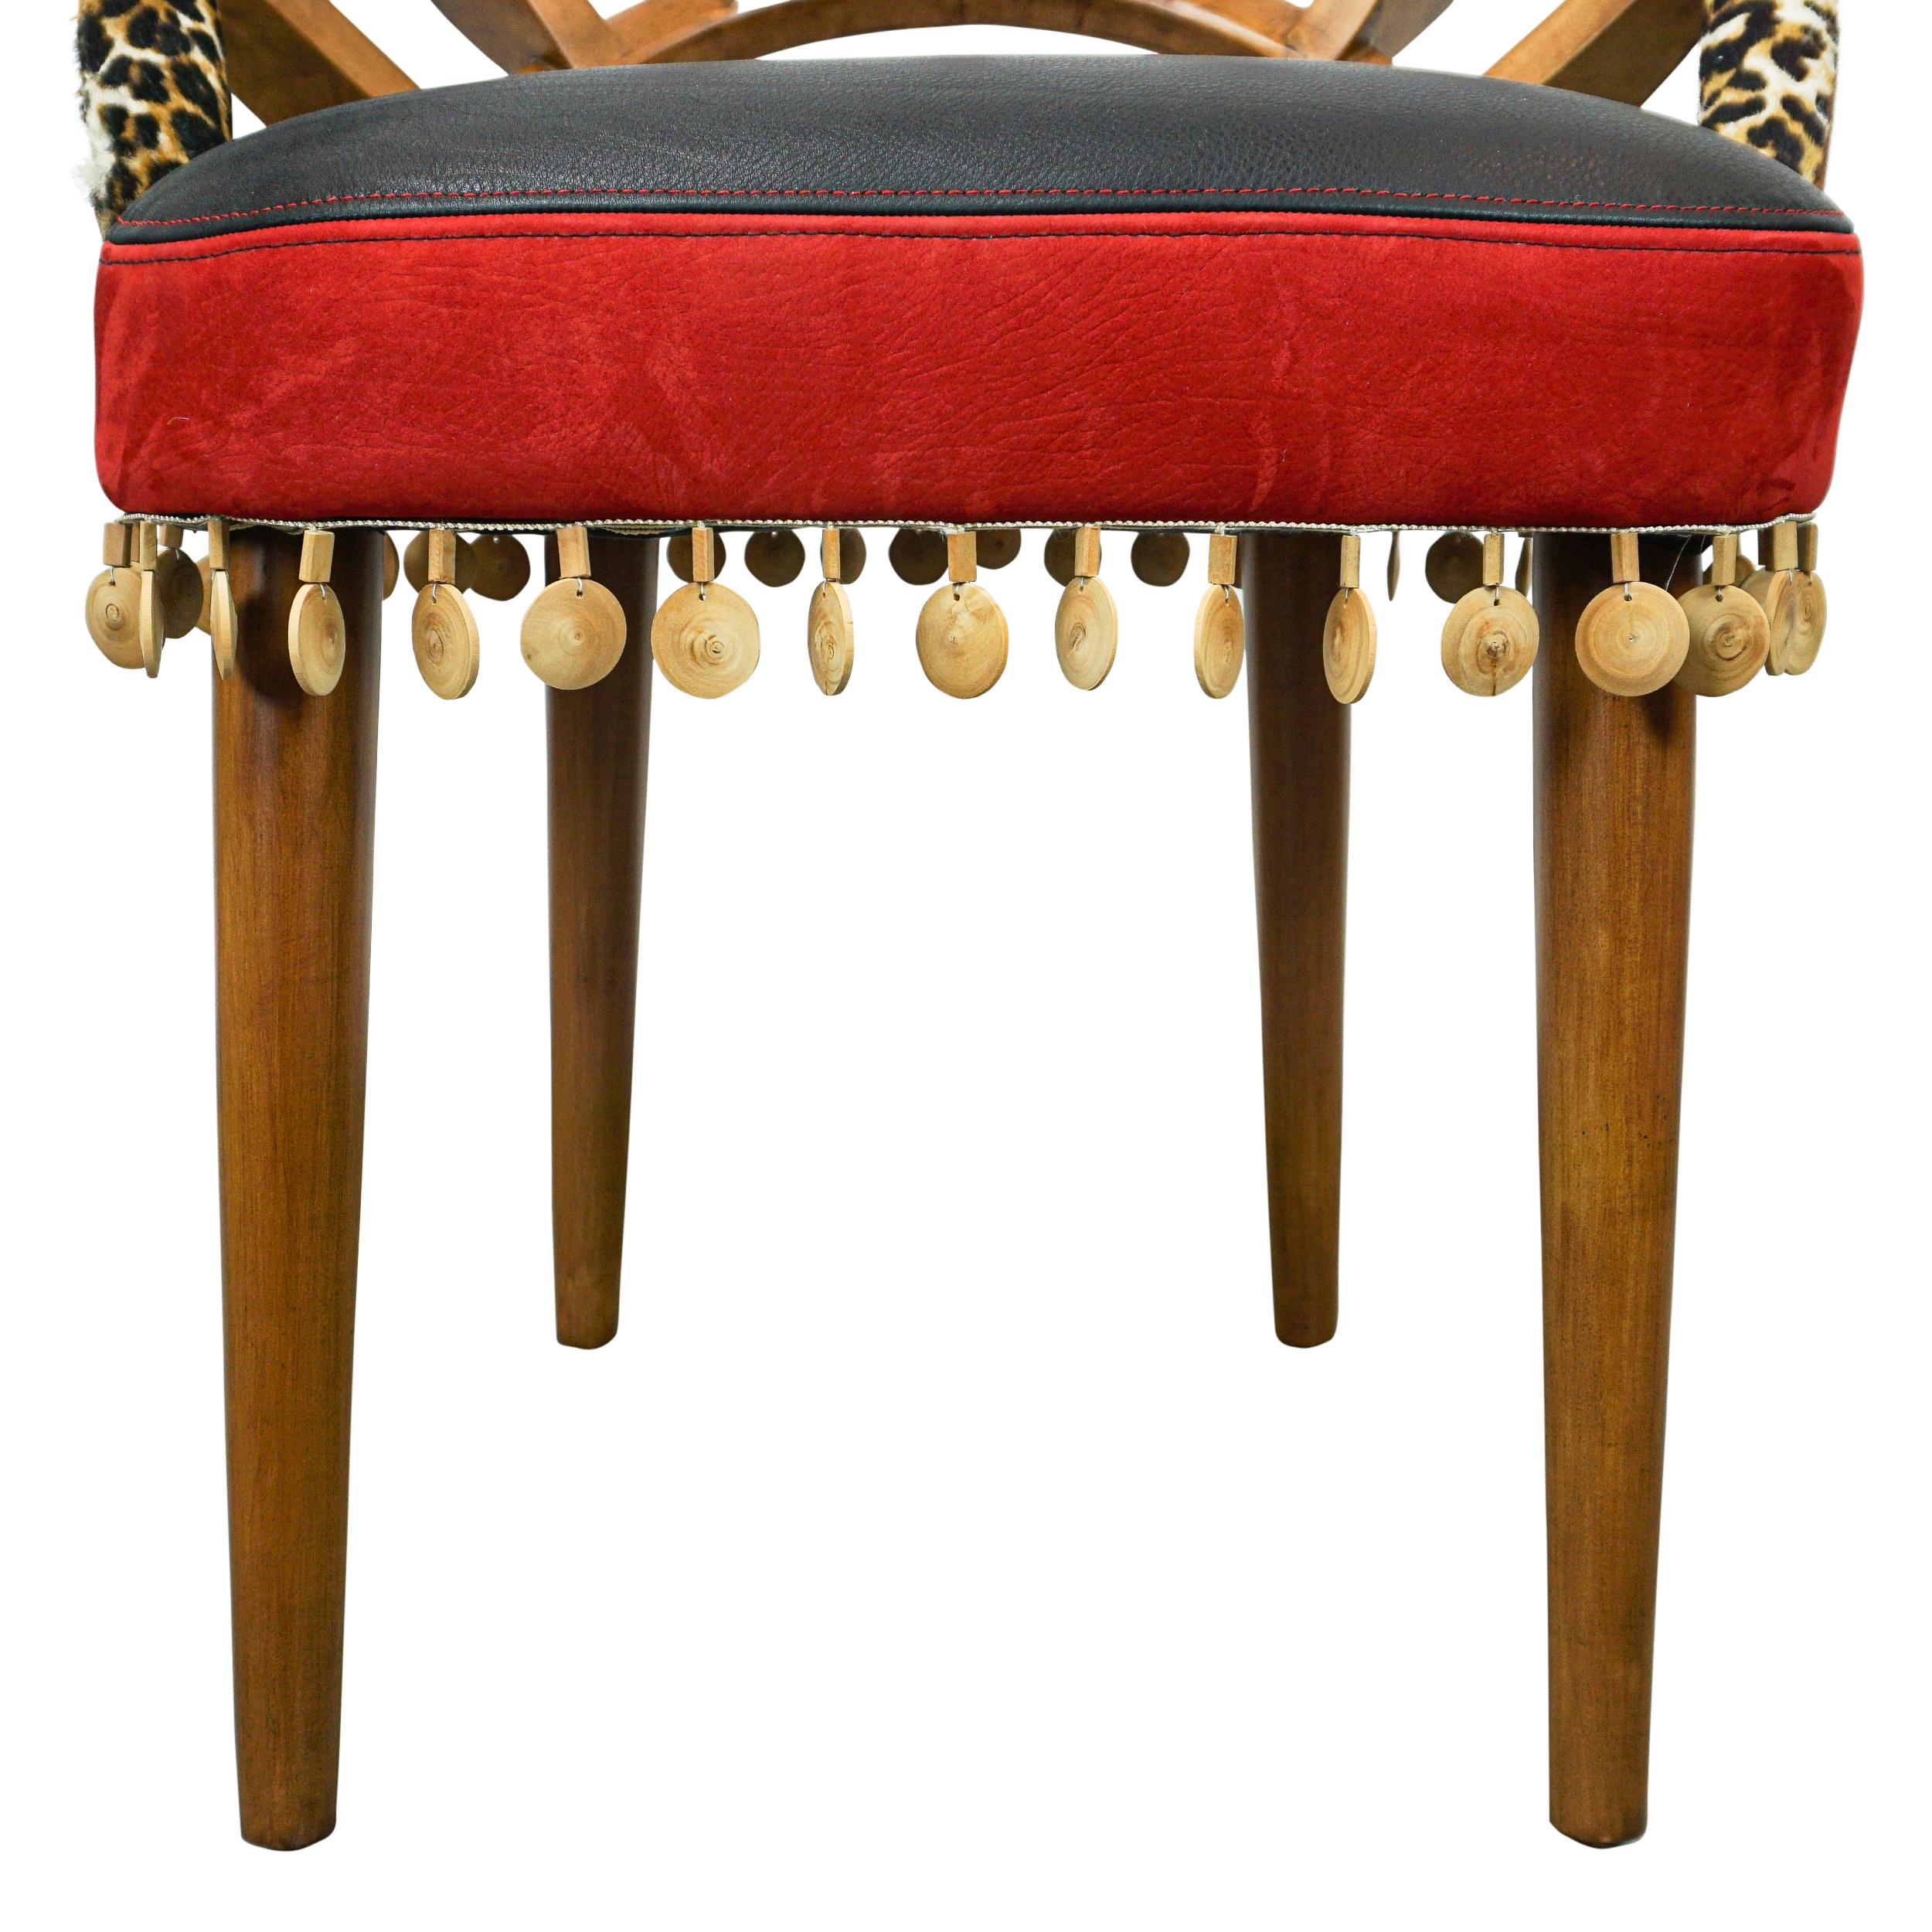 Ribbed Wood Chair with Cheetah Hair on Hide, Red + Black Leather and Wood Bead For Sale 7